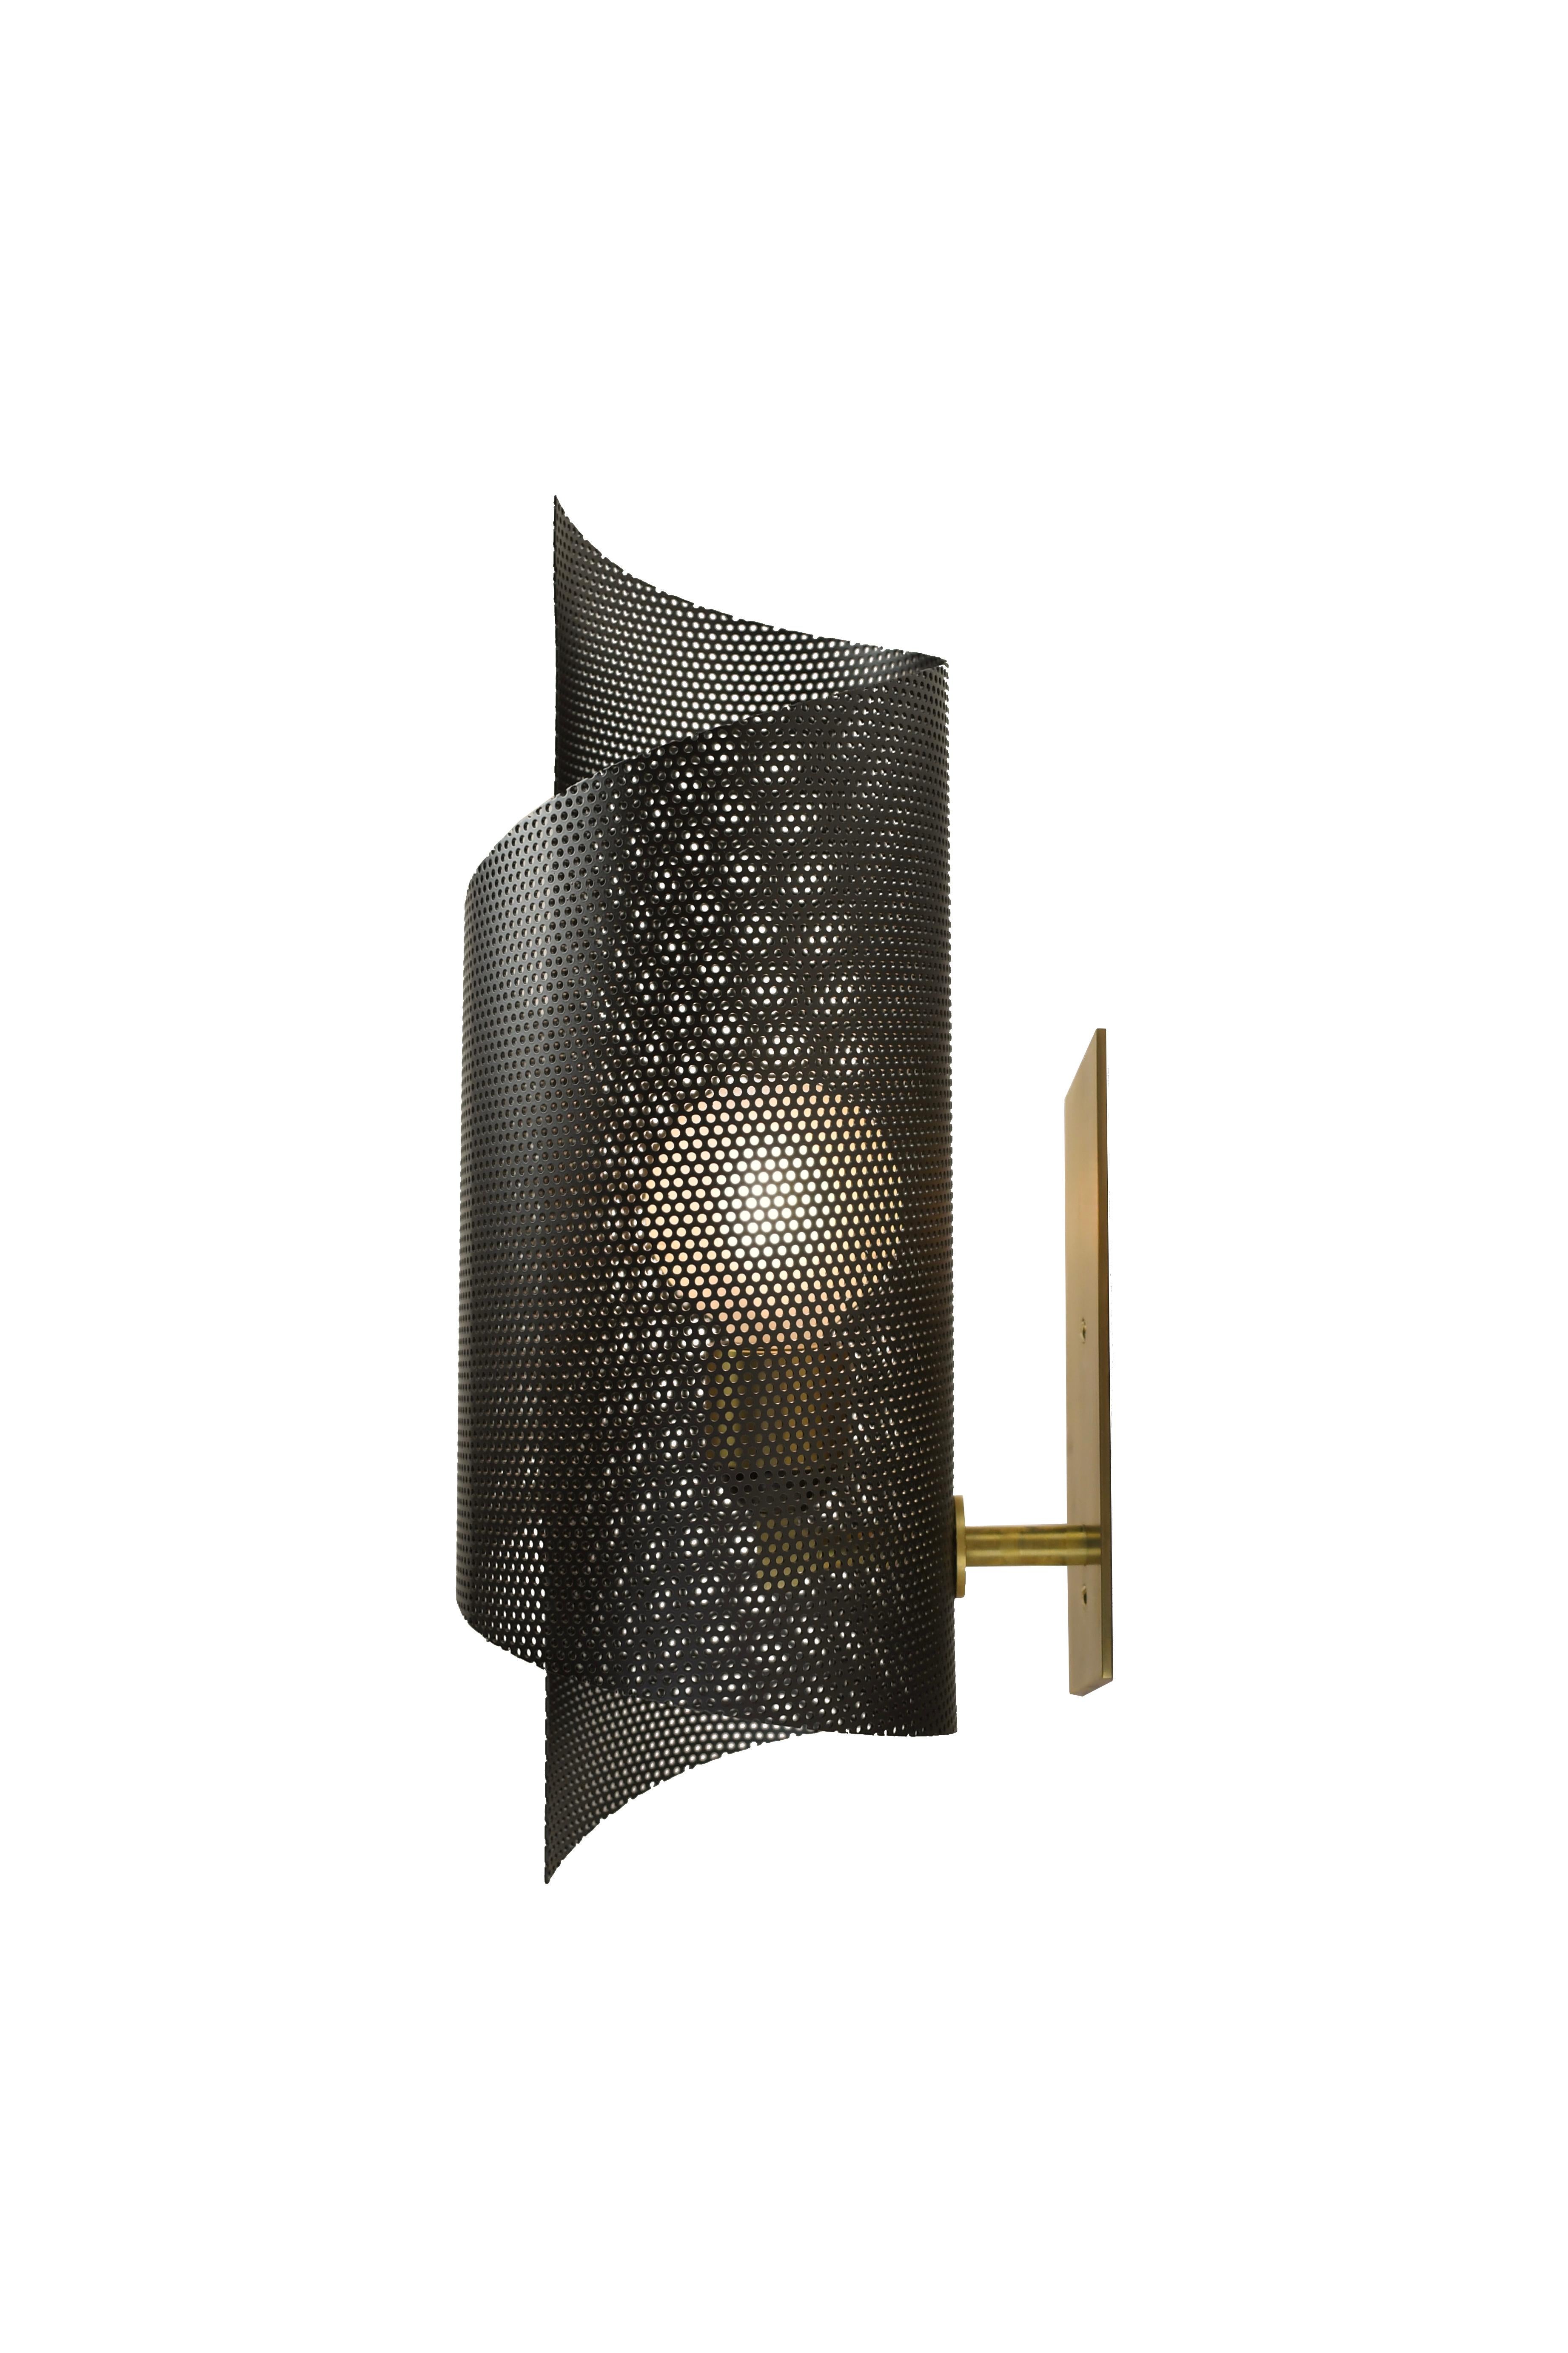 The Spun Tulle wall sconce is a graceful, commanding piece of sculpture that works well in both modern and transitional interiors. Shown here in our matte black enamel and natural brass hardware. Available in any of our 36 enamel colors and 7 metal